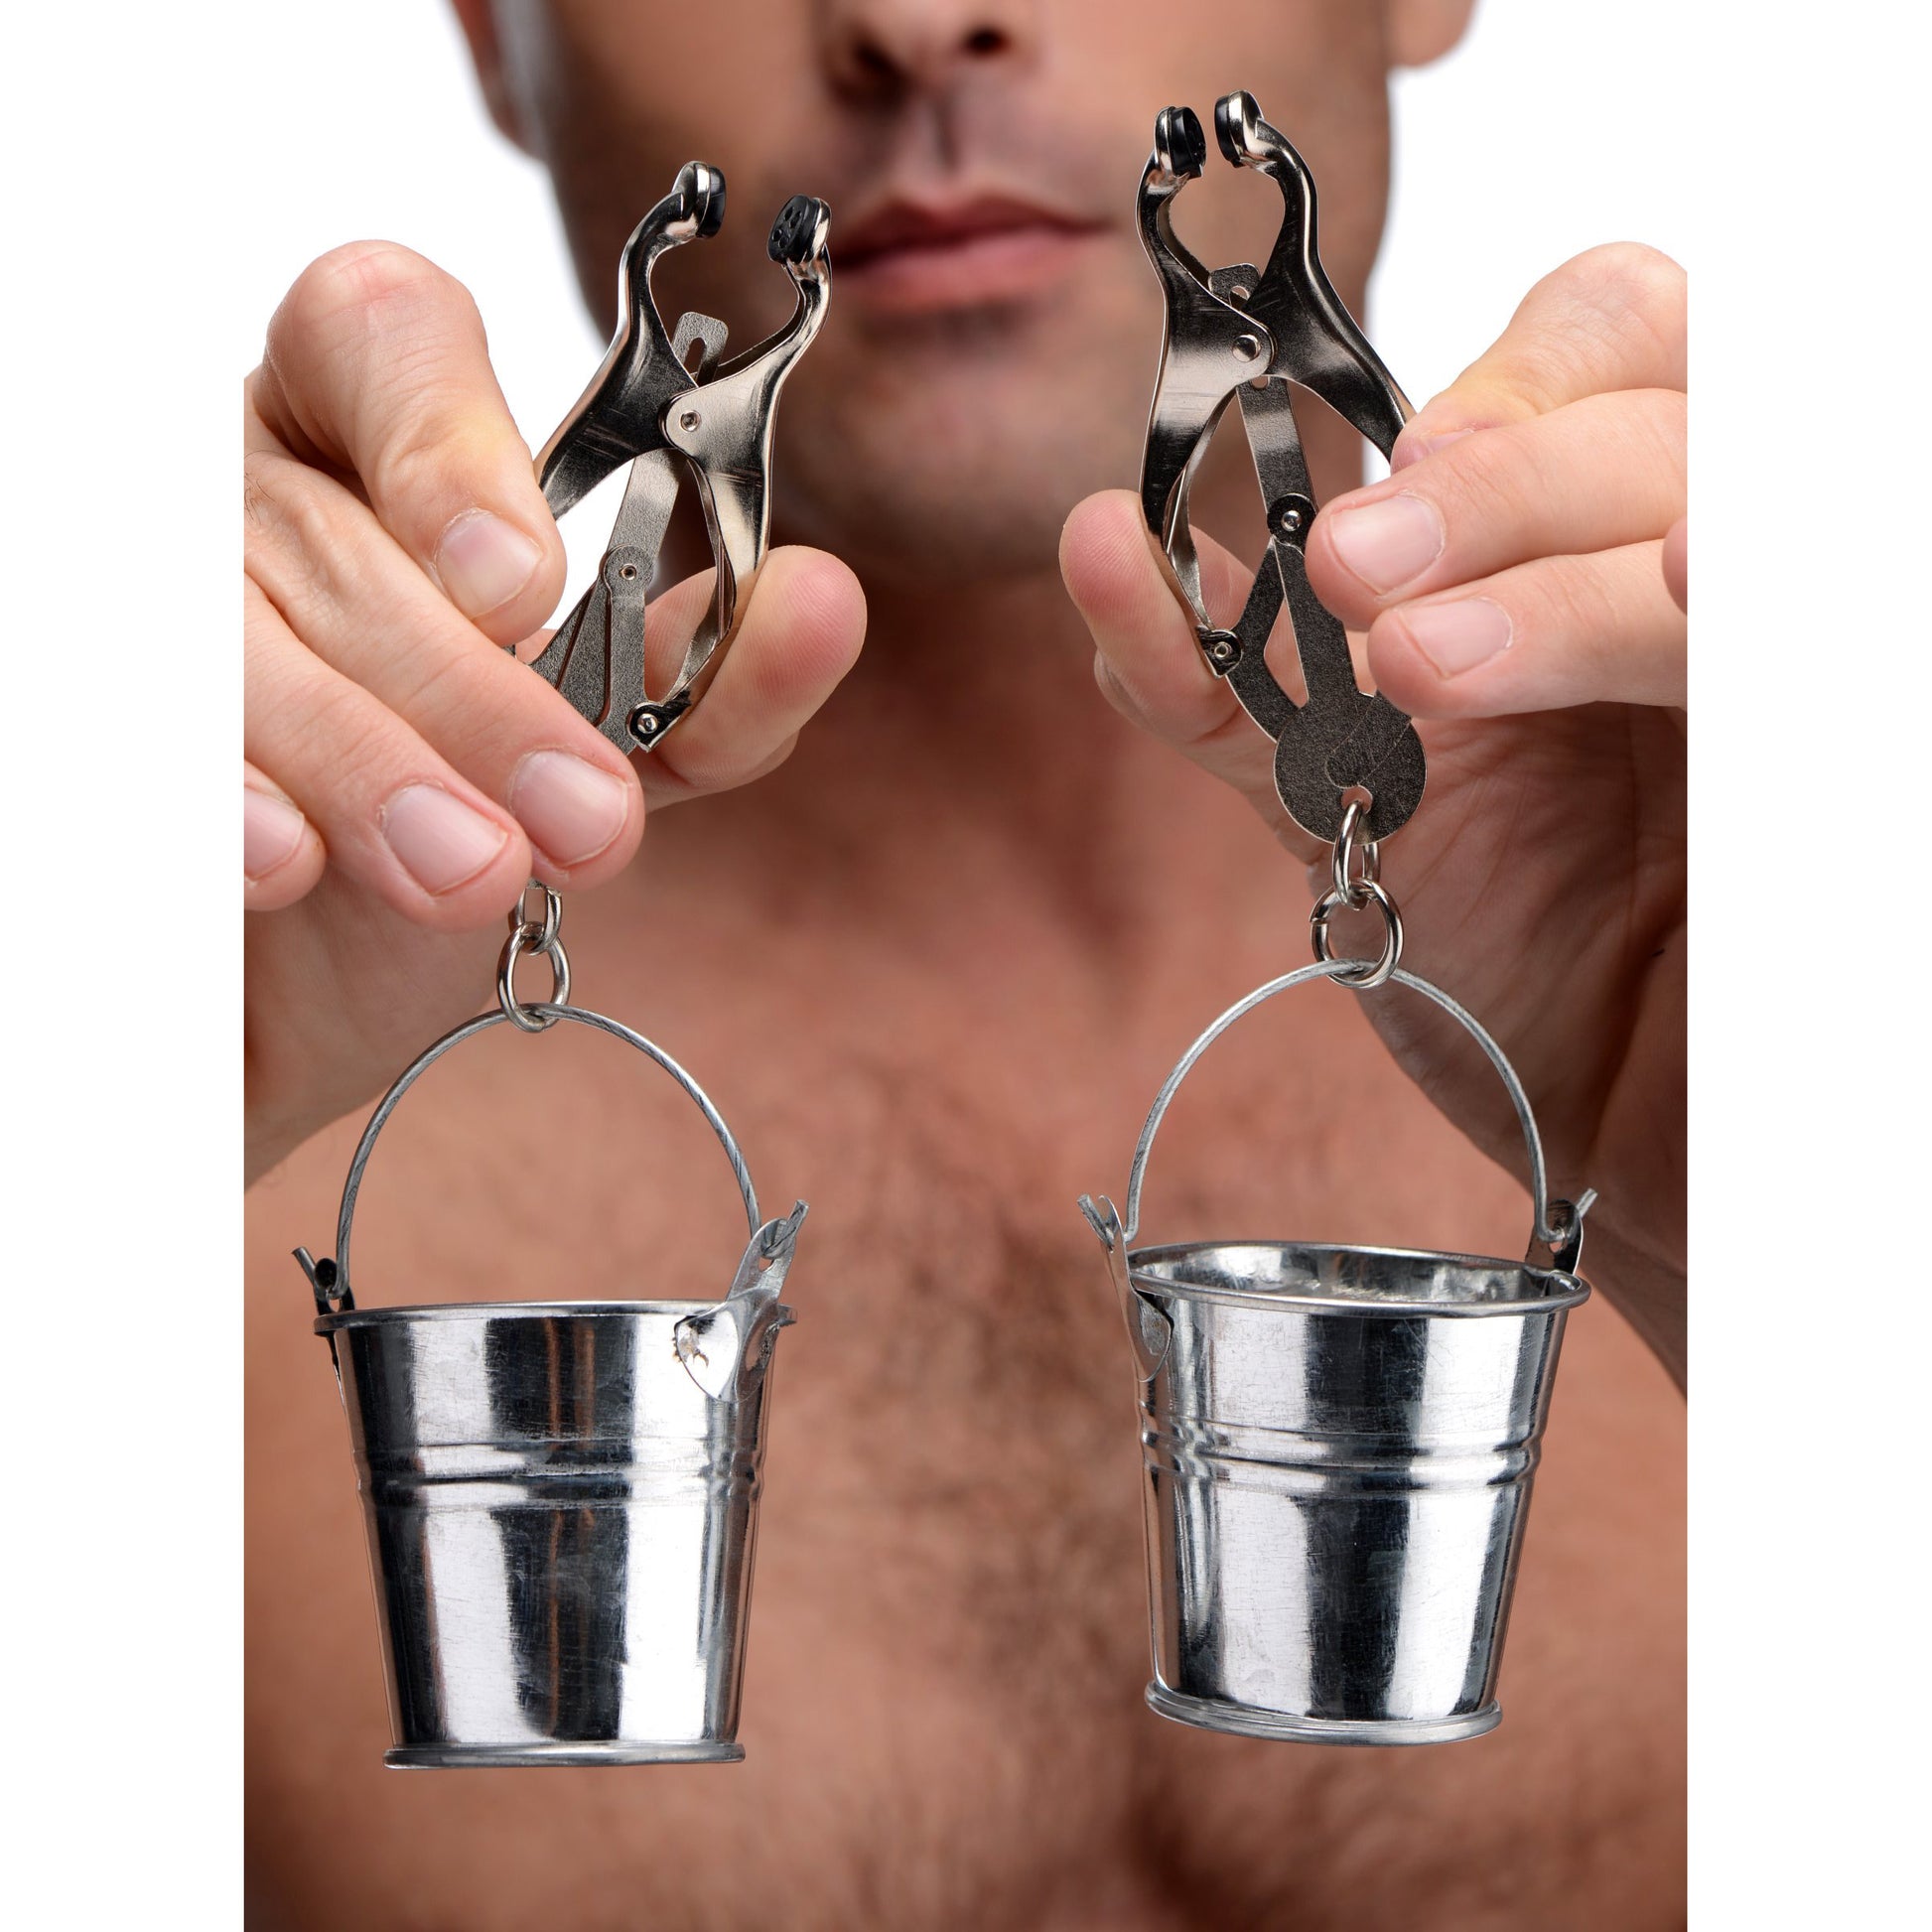 Jugs Nipple Clamps with Buckets - UABDSM